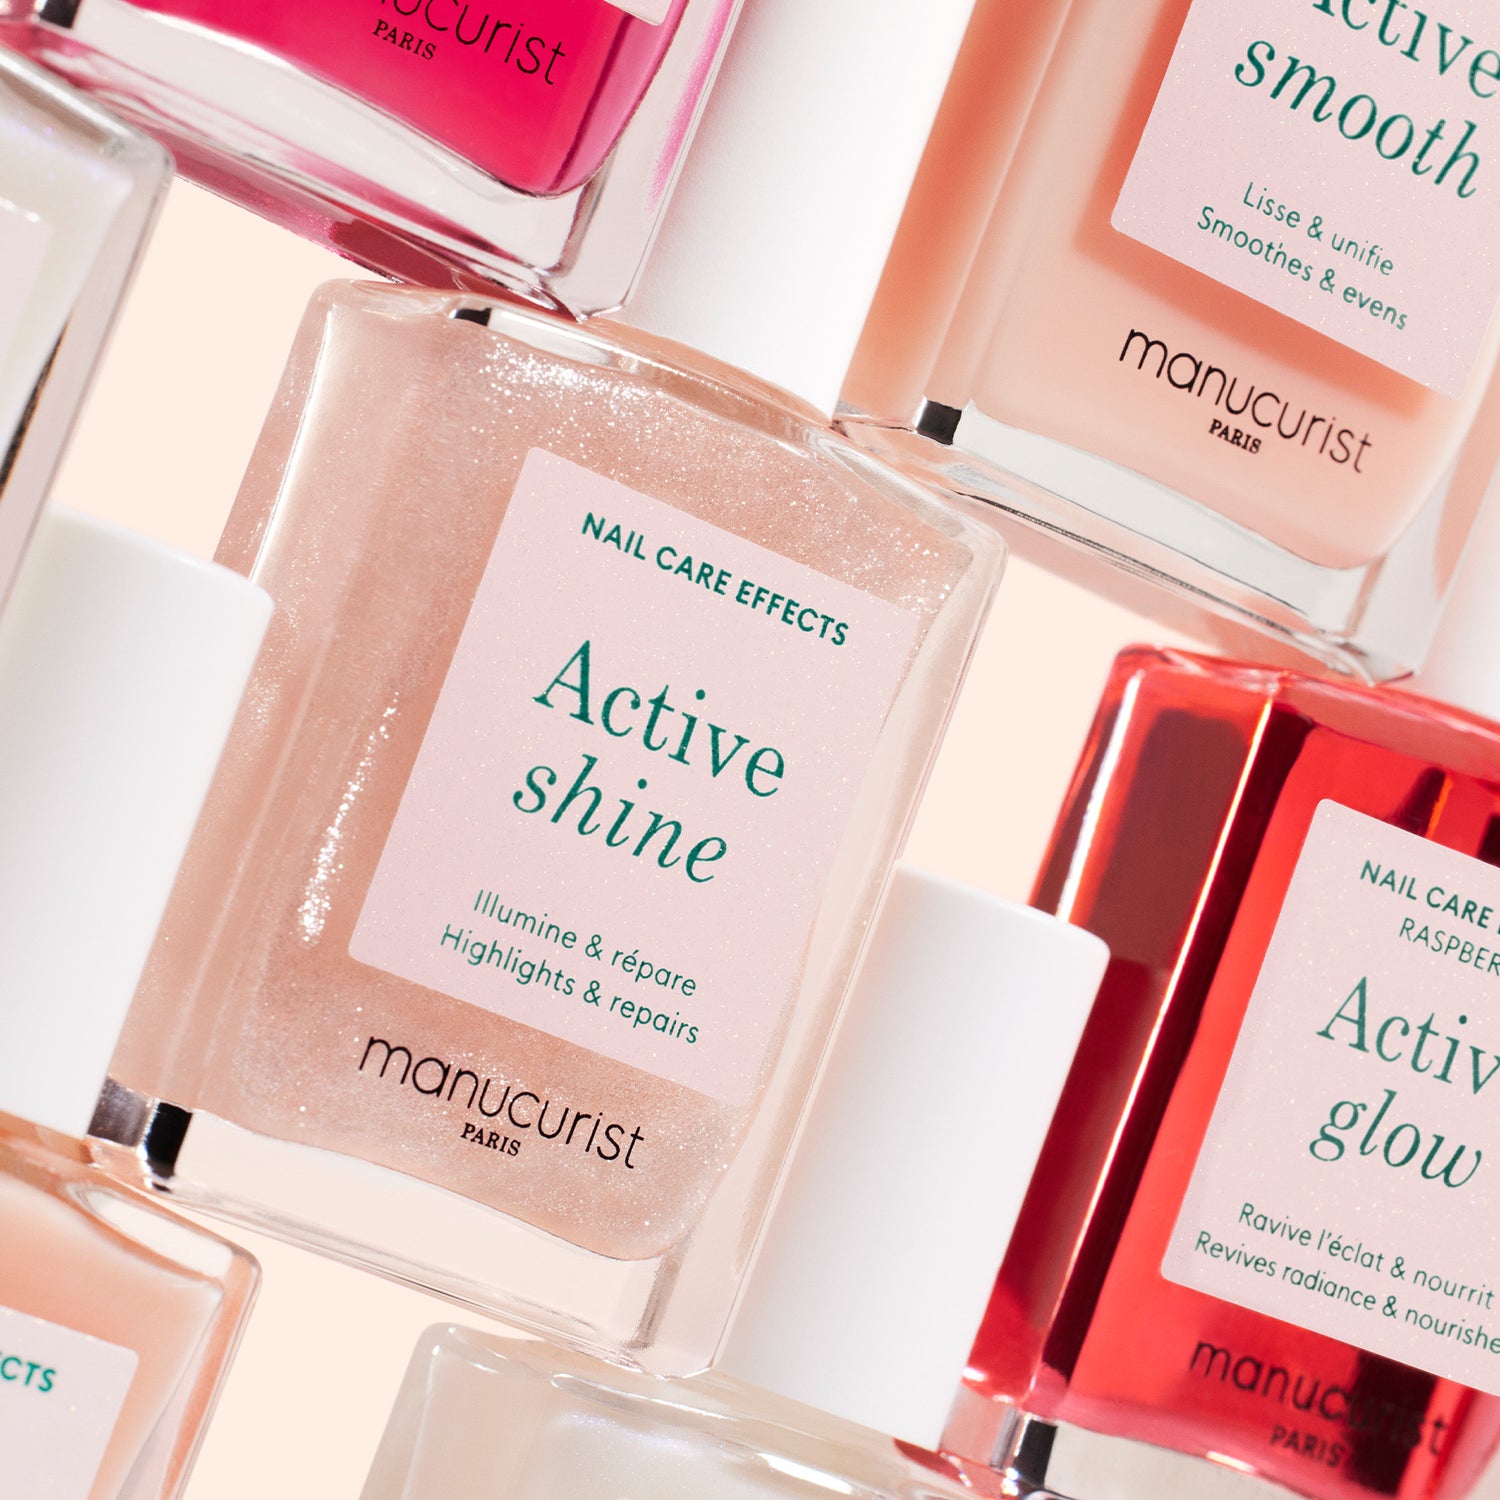 Following the success of our first Active Glow perfecter treatment launched in April 2023, discover our brand new Active range with 4 new nail-enhancing care products to boost your nails' natural shine. Your nails, but better!